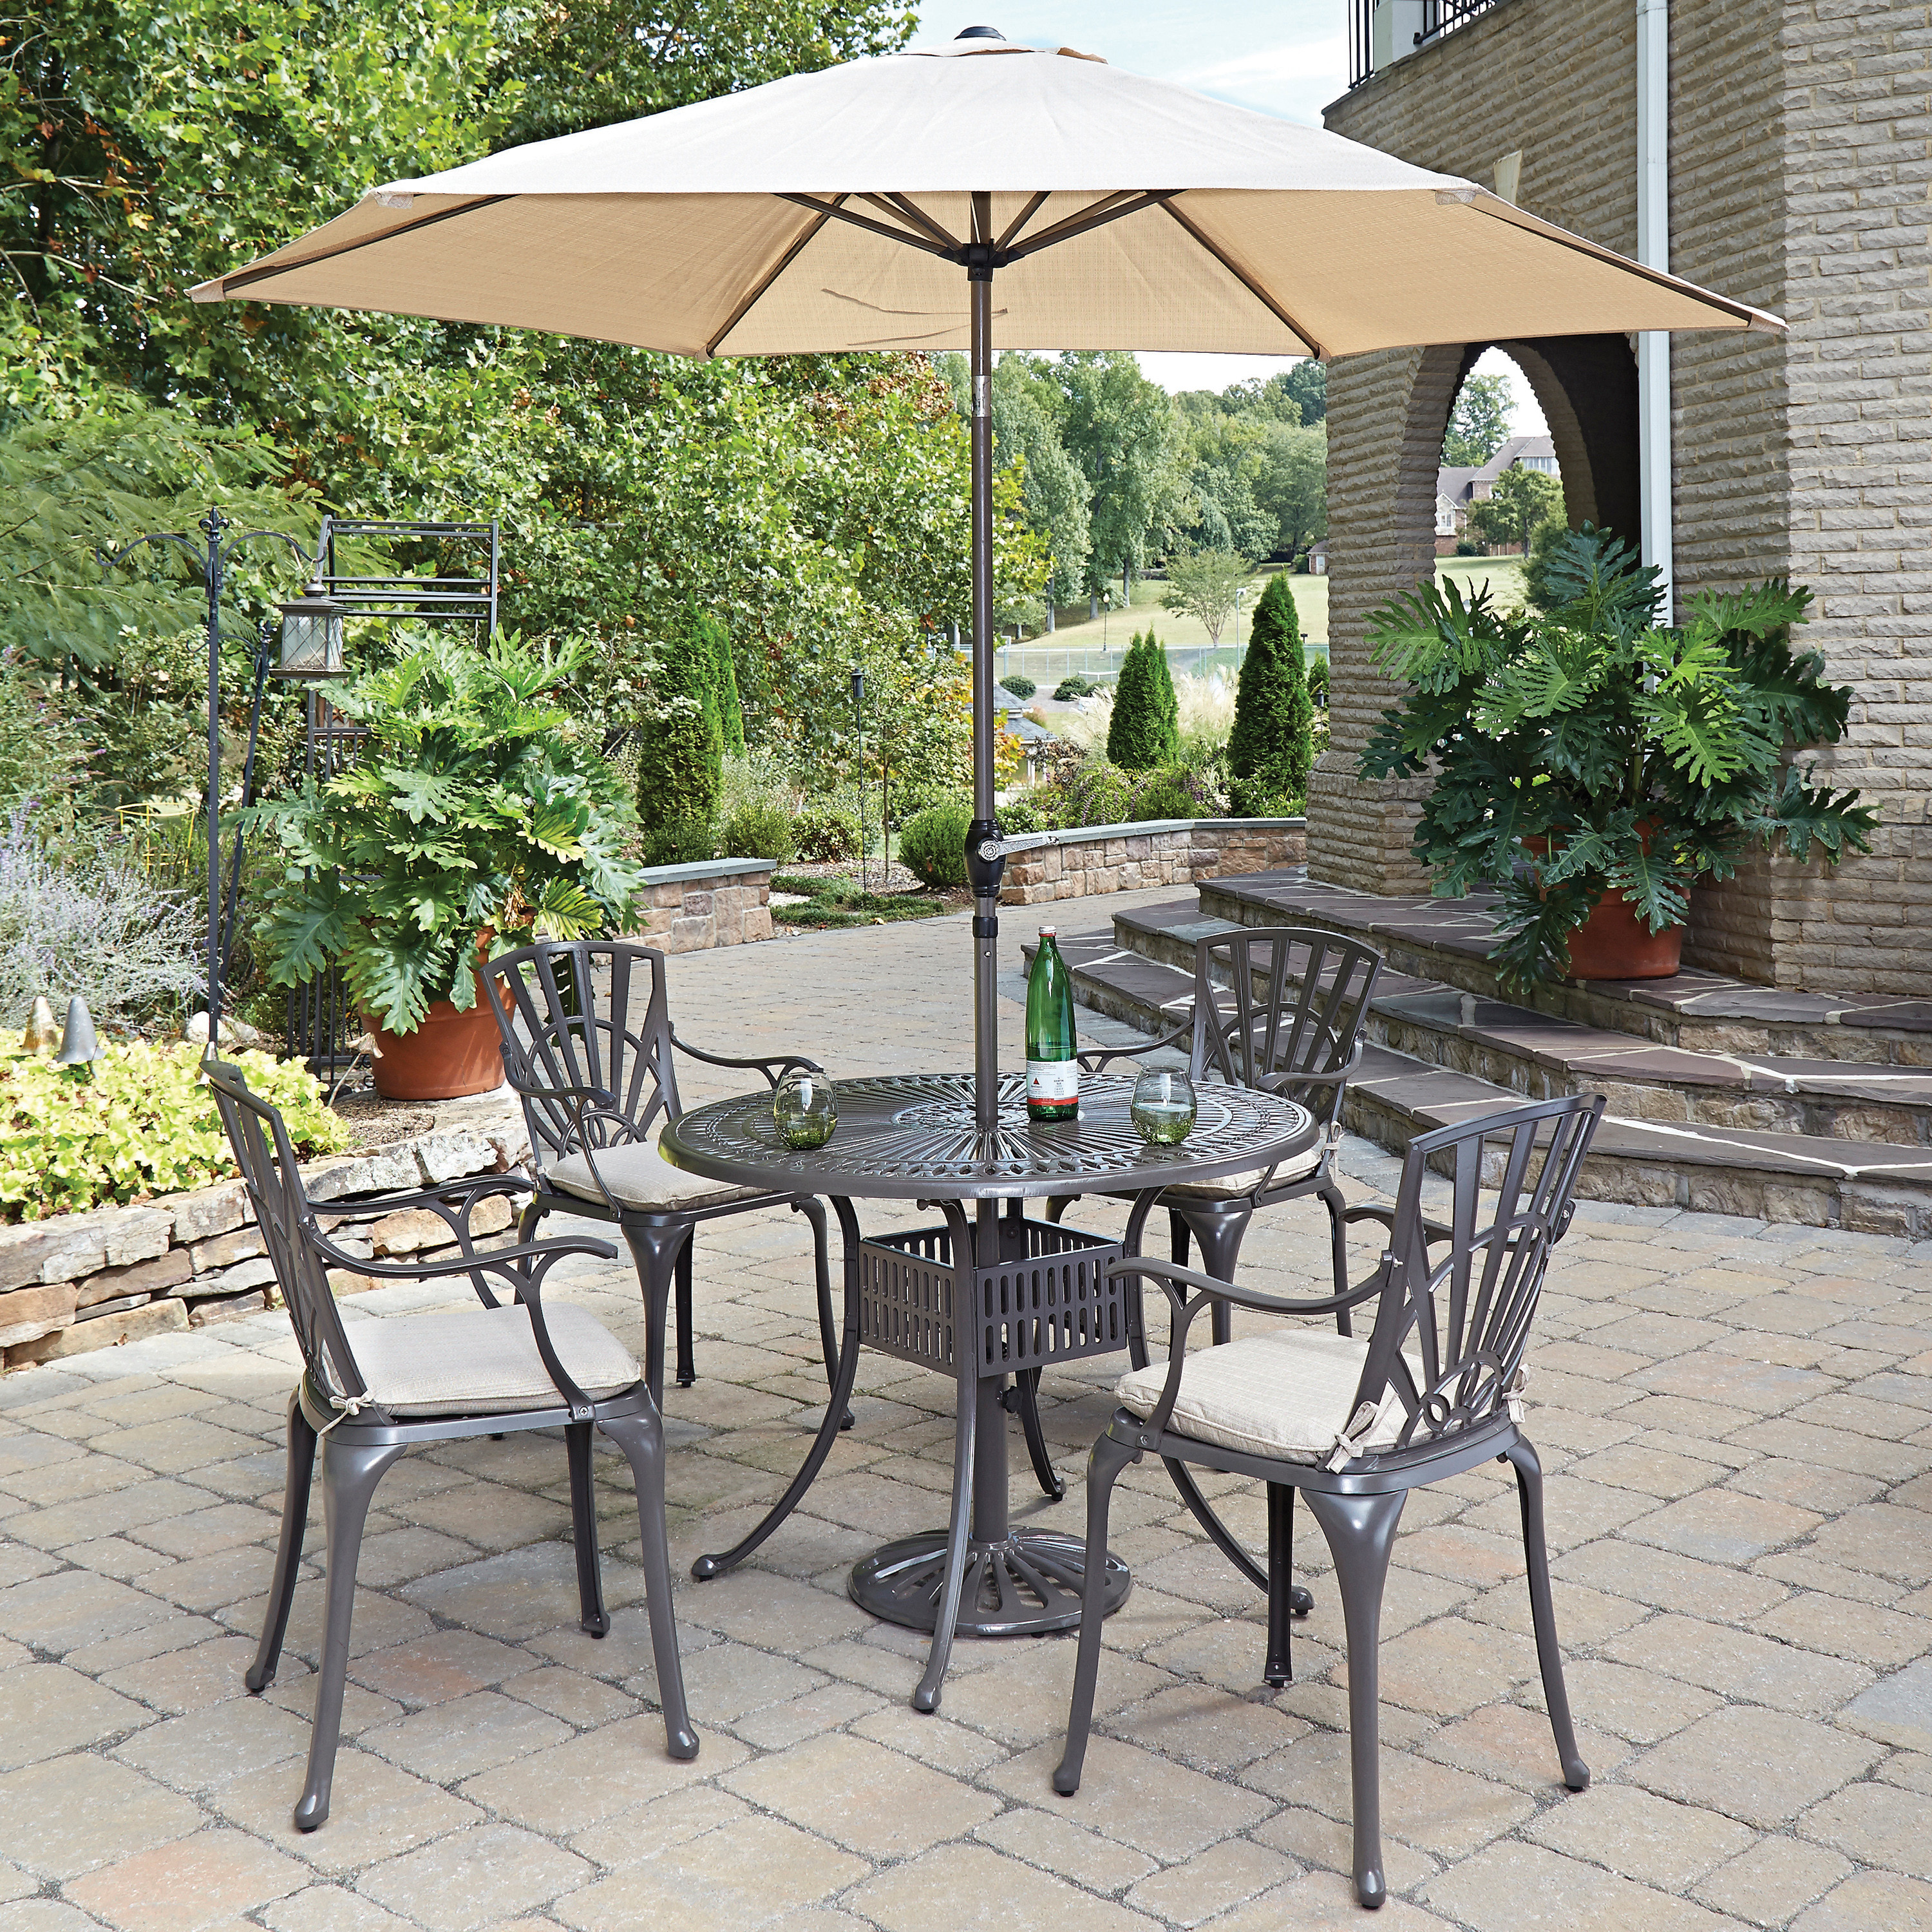 The Best Patio Dining Sets with Umbrella - Best Collections Ever | Home